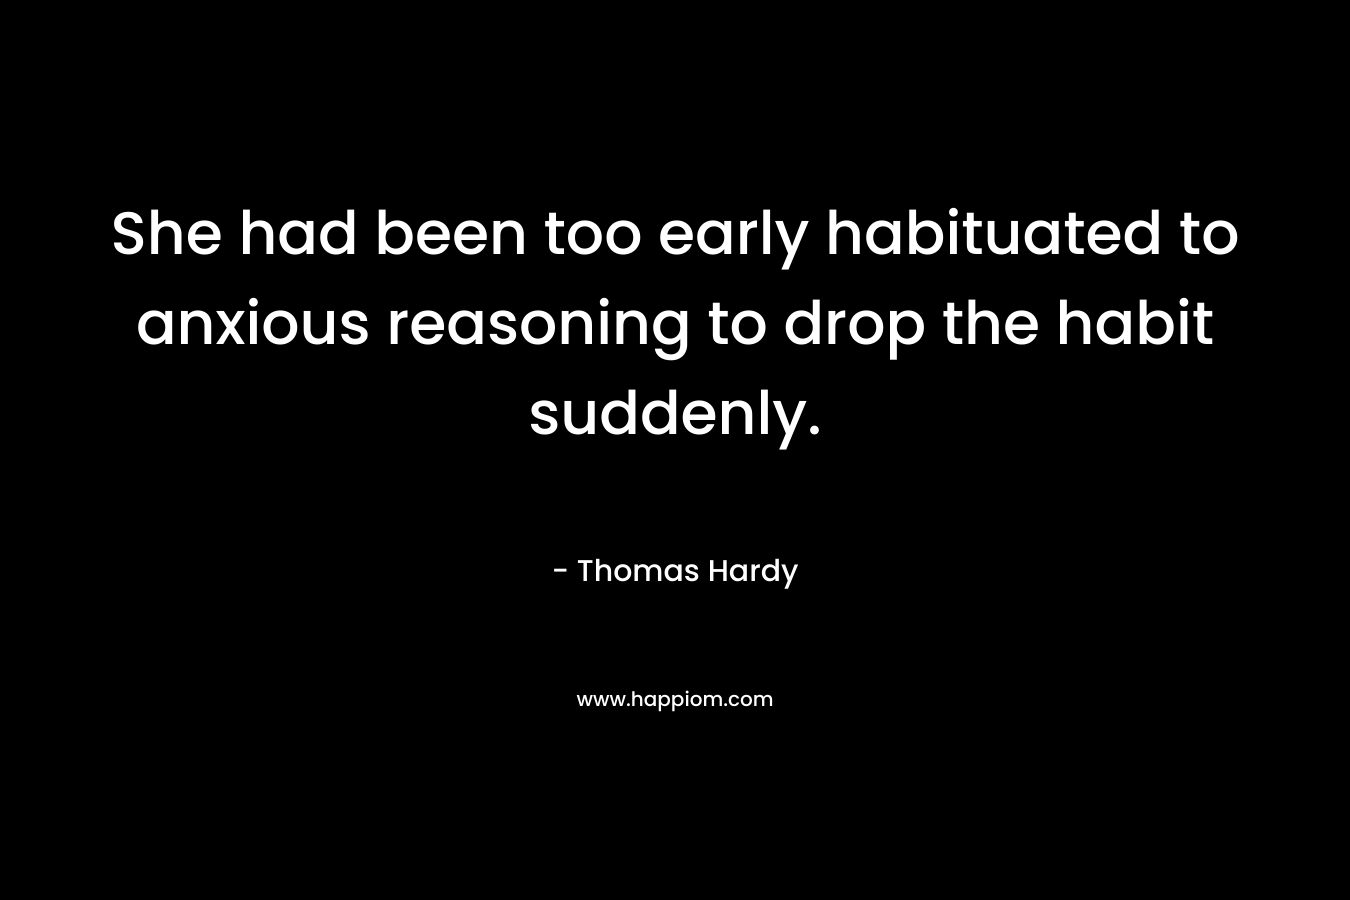 She had been too early habituated to anxious reasoning to drop the habit suddenly. – Thomas Hardy